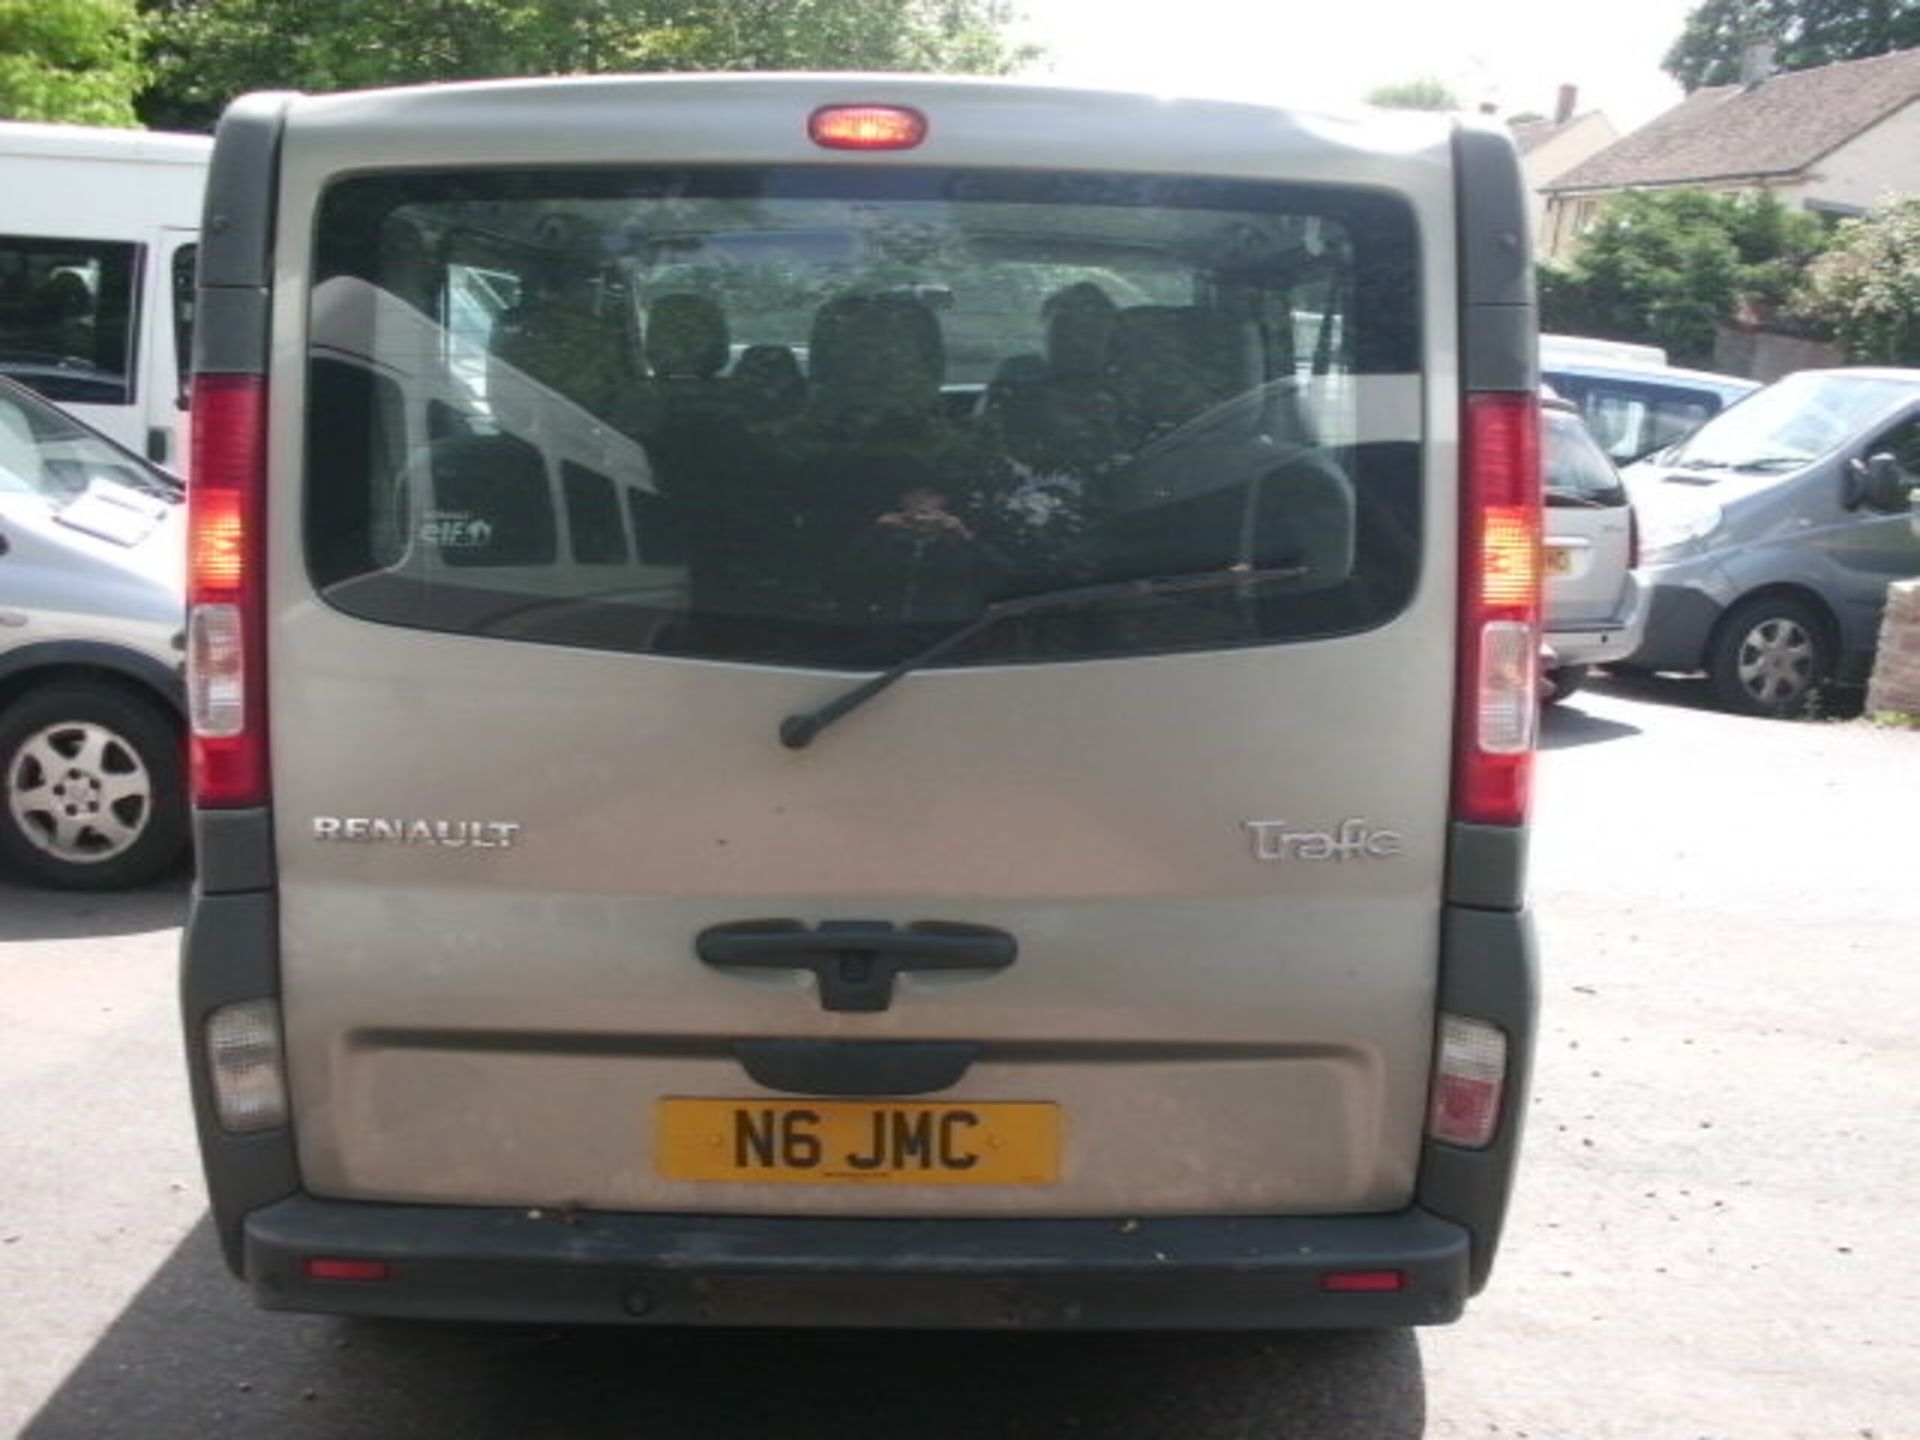 2010 (June) RENAULT TRAFIC SL27 Dci 115 9 seater MINI BUS including driver, grey, diesel, 1996cc, - Image 4 of 4